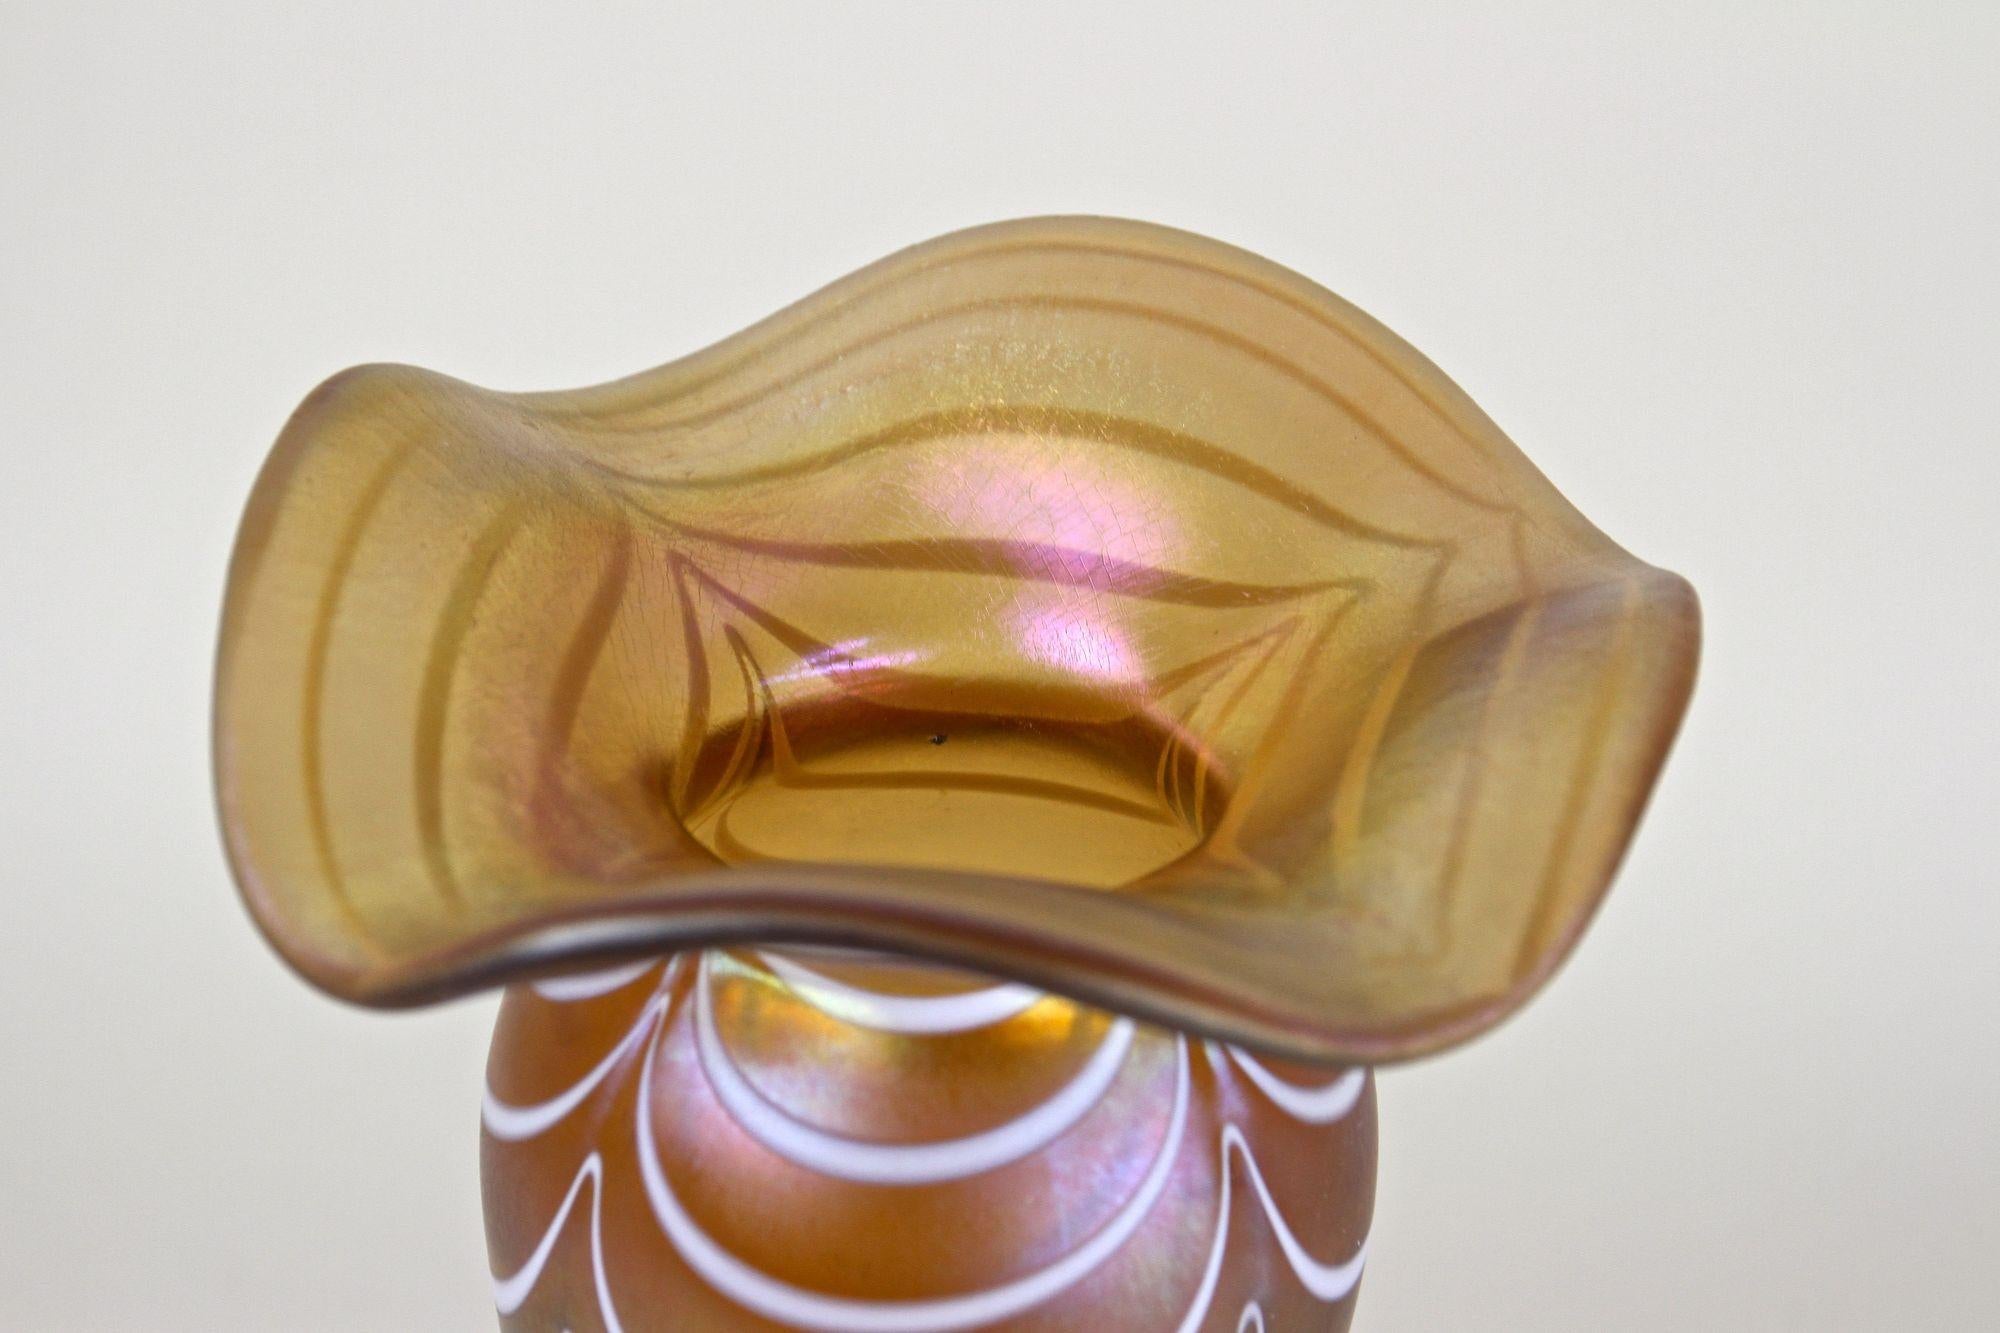 Art Nouveau Iridescent Glass Vase Attributed To Loetz Witwe, Bohemia, ca. 1915 For Sale 1